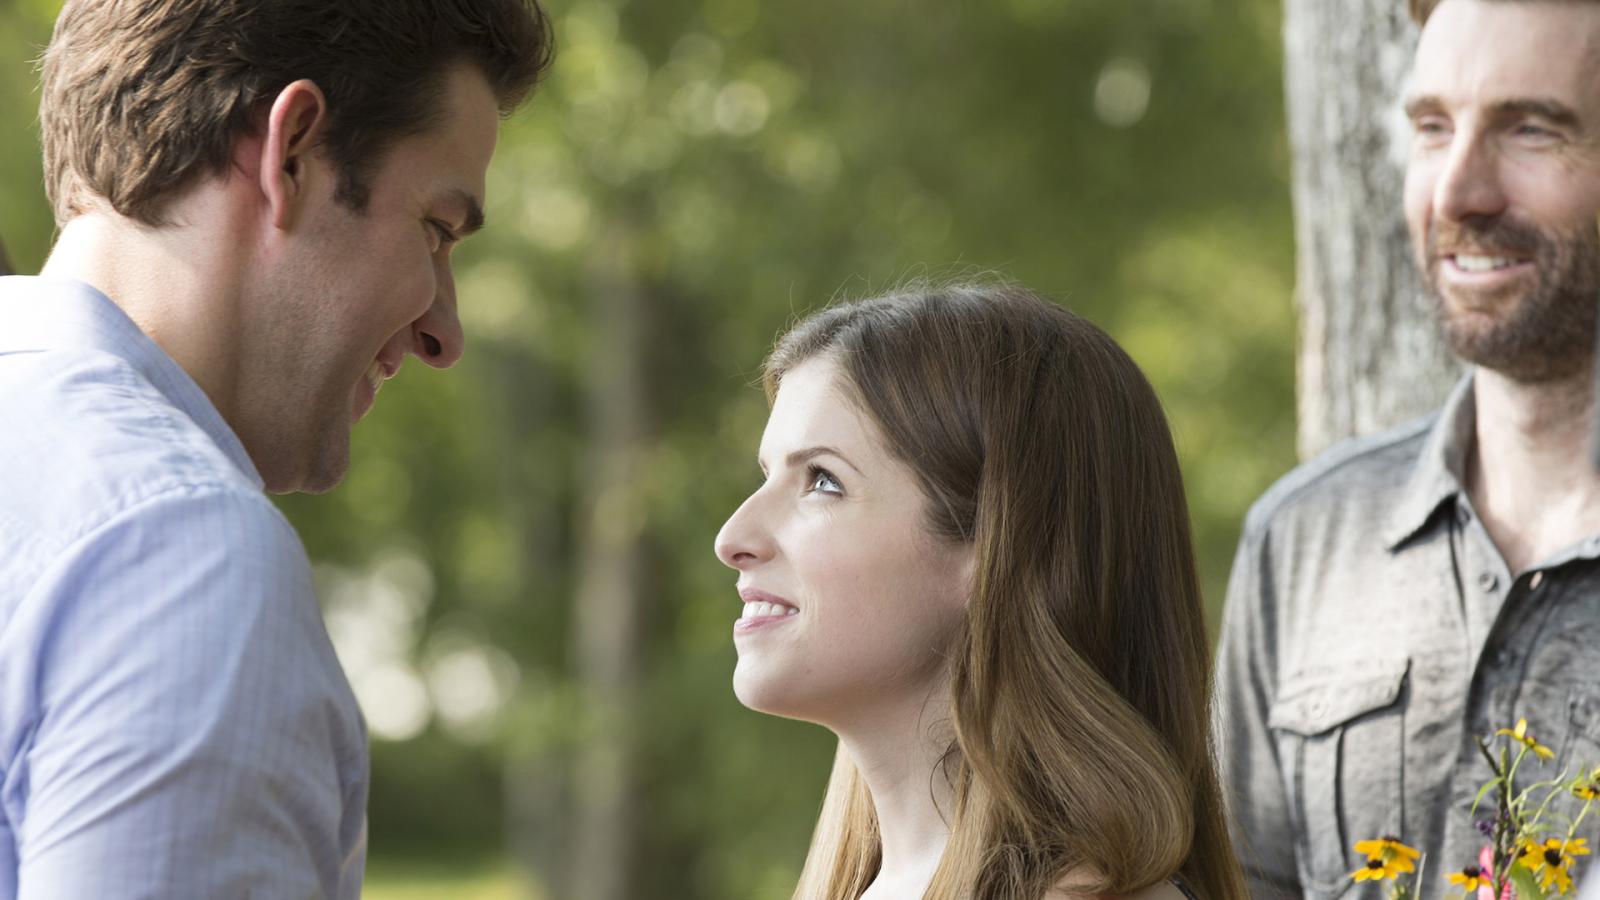 Anna Kendrick's 10 Best Roles After Twilight (and No, Pitch Perfect Not Included) - image 8